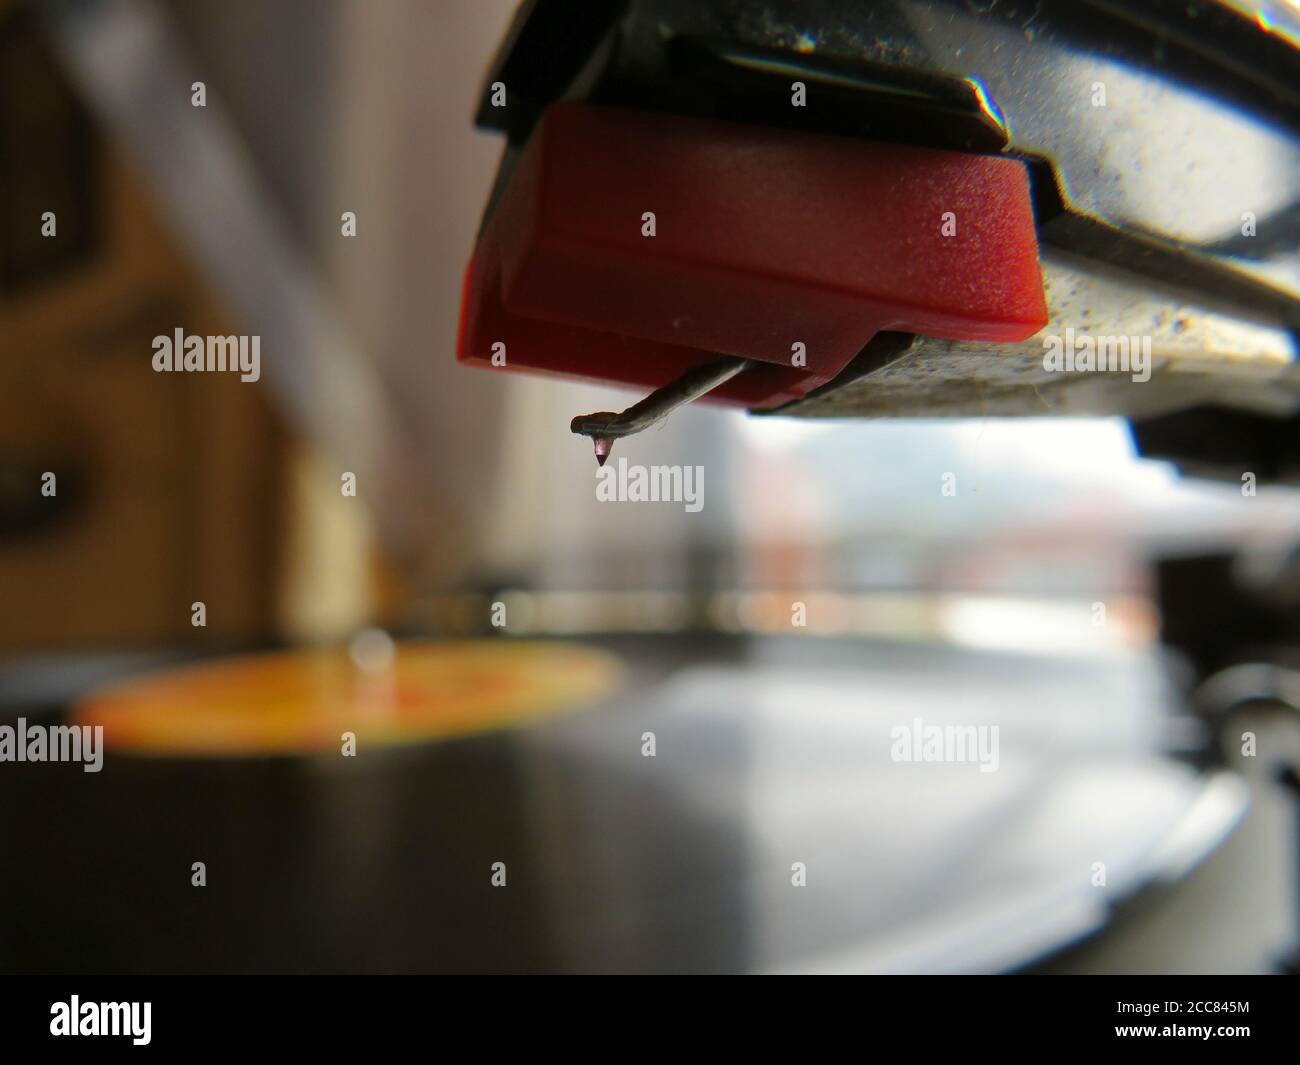 Close up of record player stylus with record soft focused in background Stock Photo